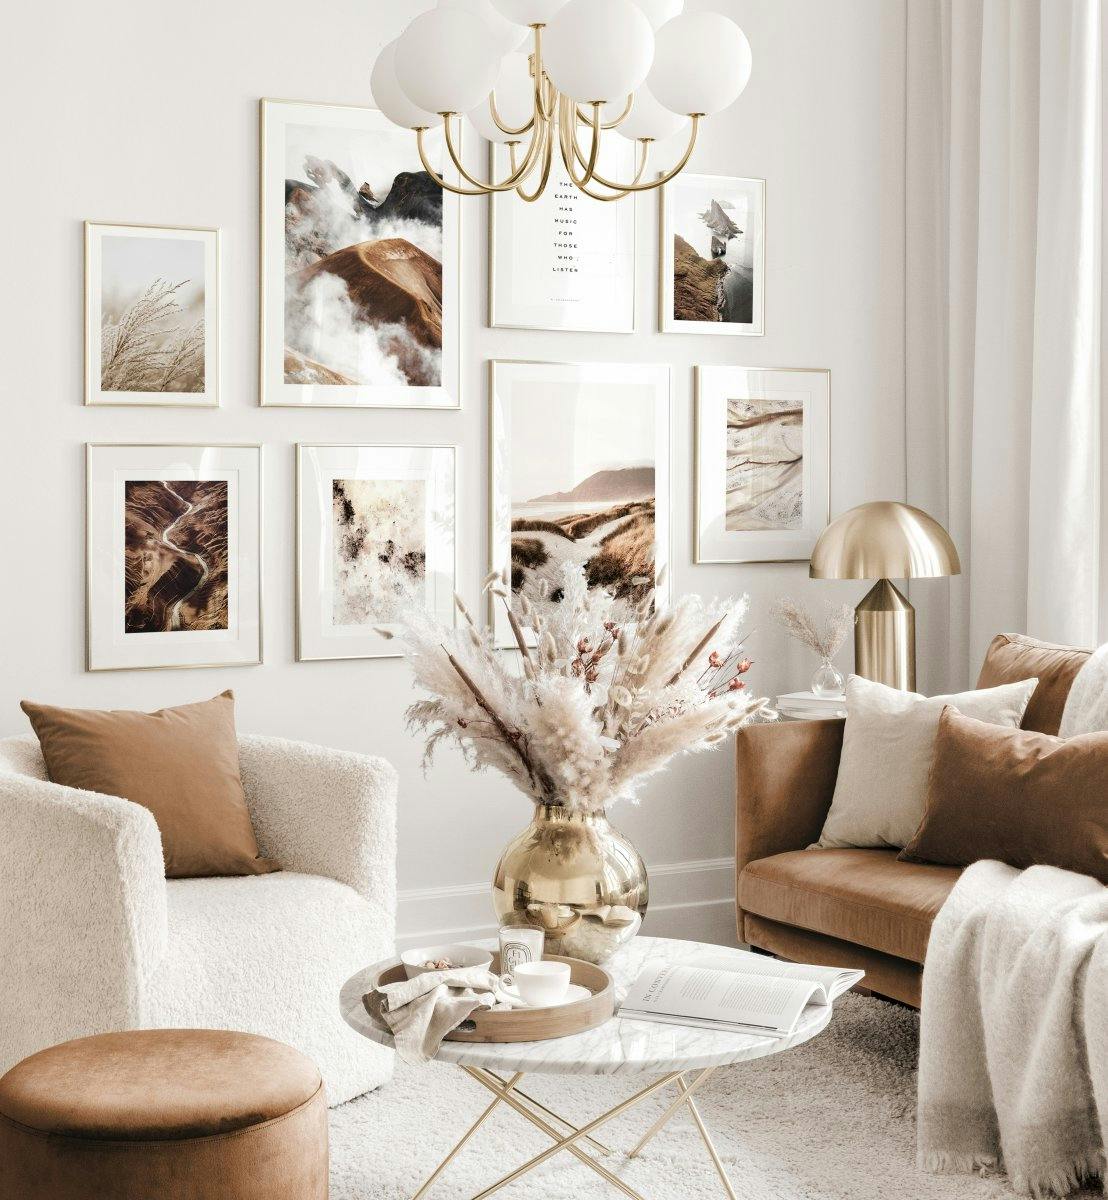 Harmonious gallery wall beige living room abstract nature posters golden frames